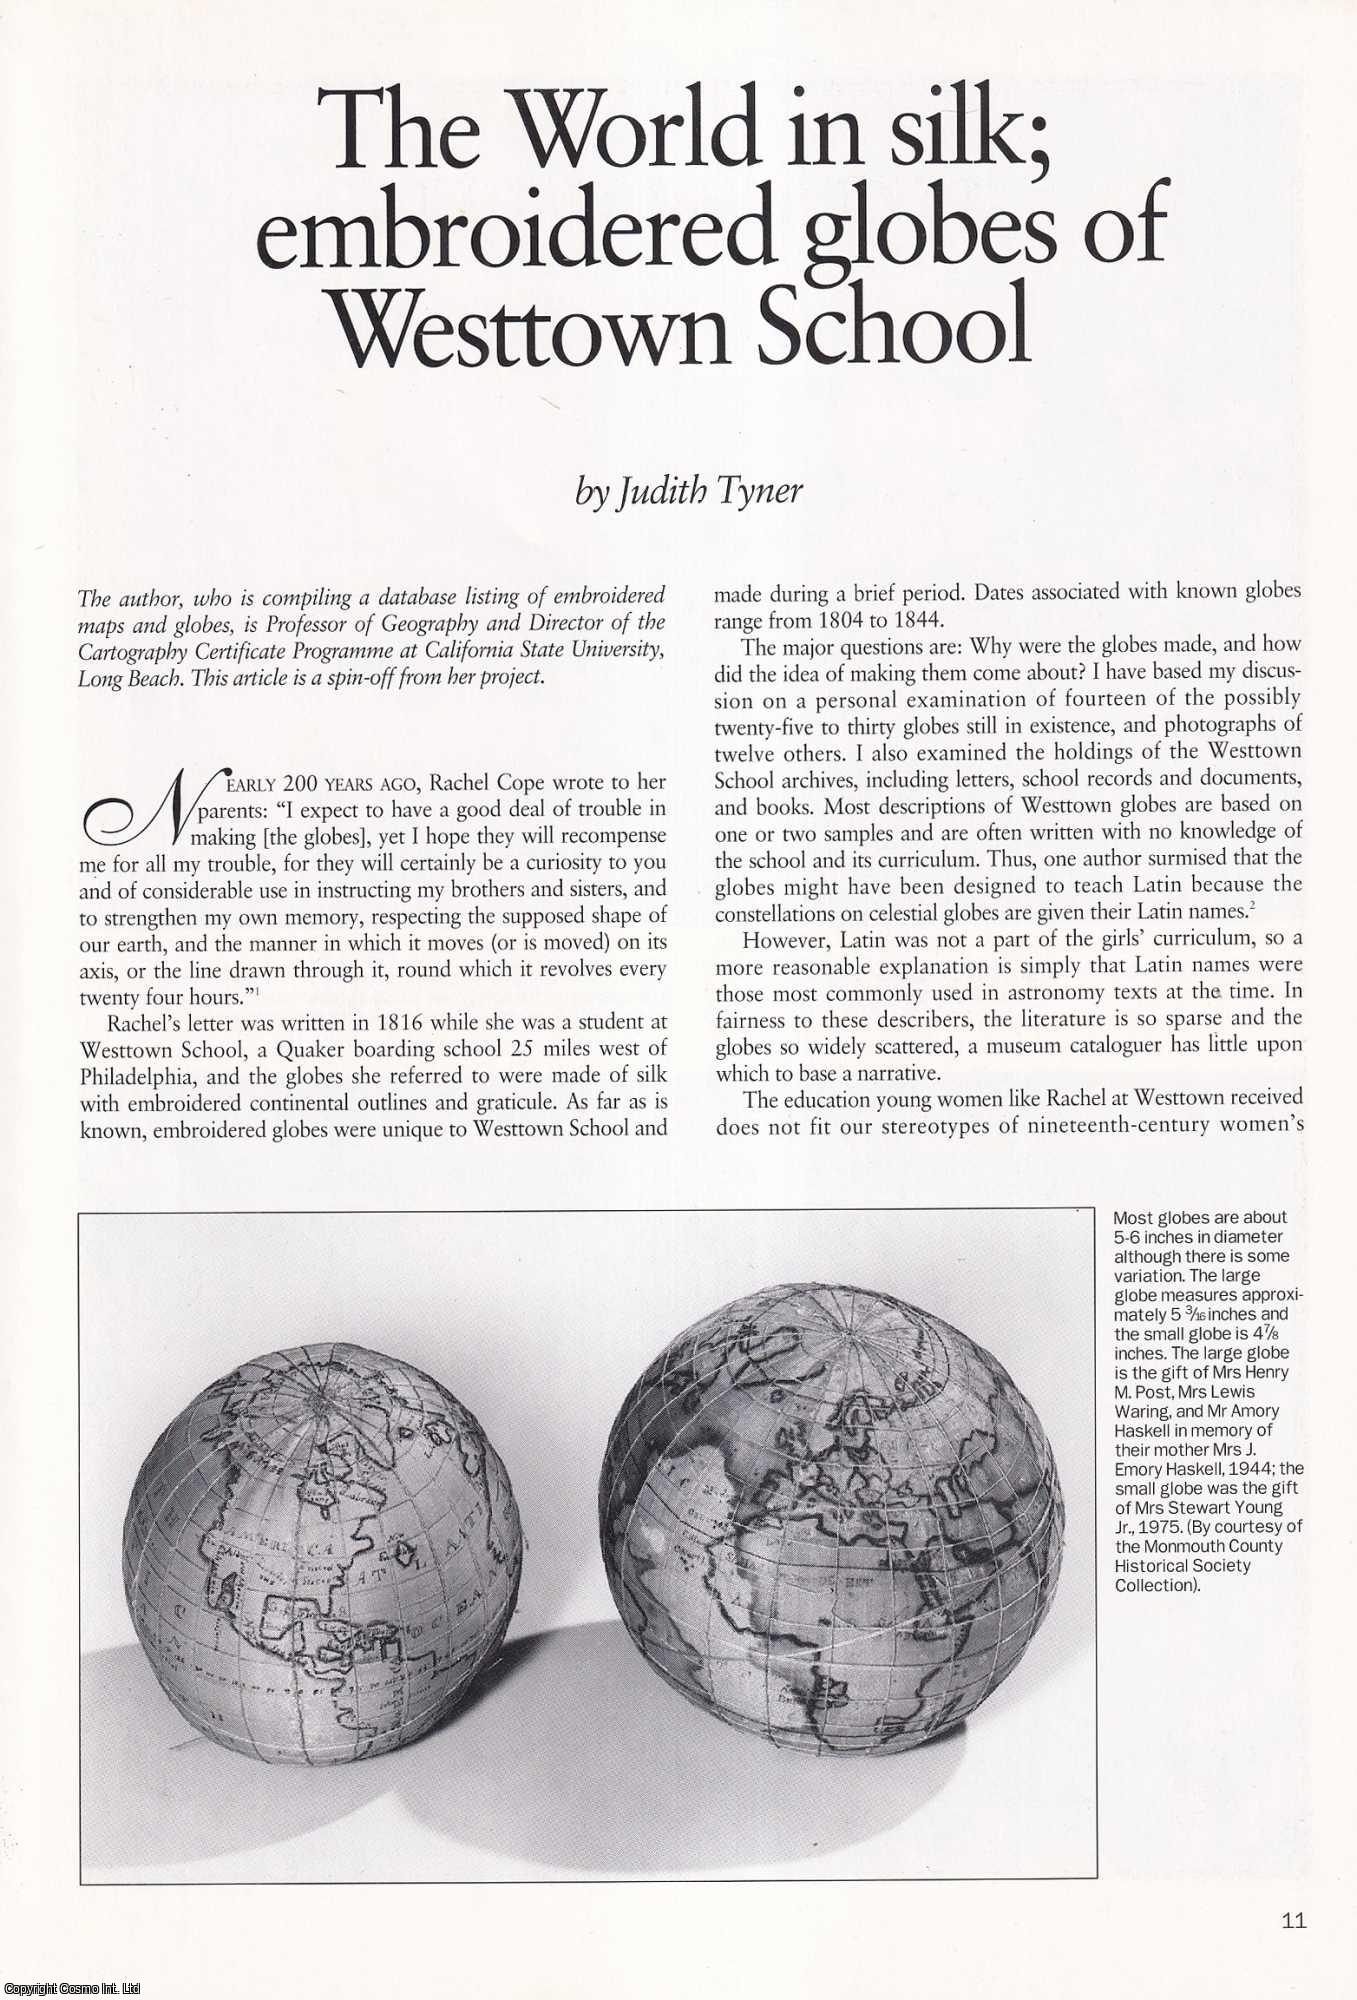 Judith Tyner - The World in Silk: Embroidered Globes of Westtown School. An original article from Map Collector Magazine, 1996.